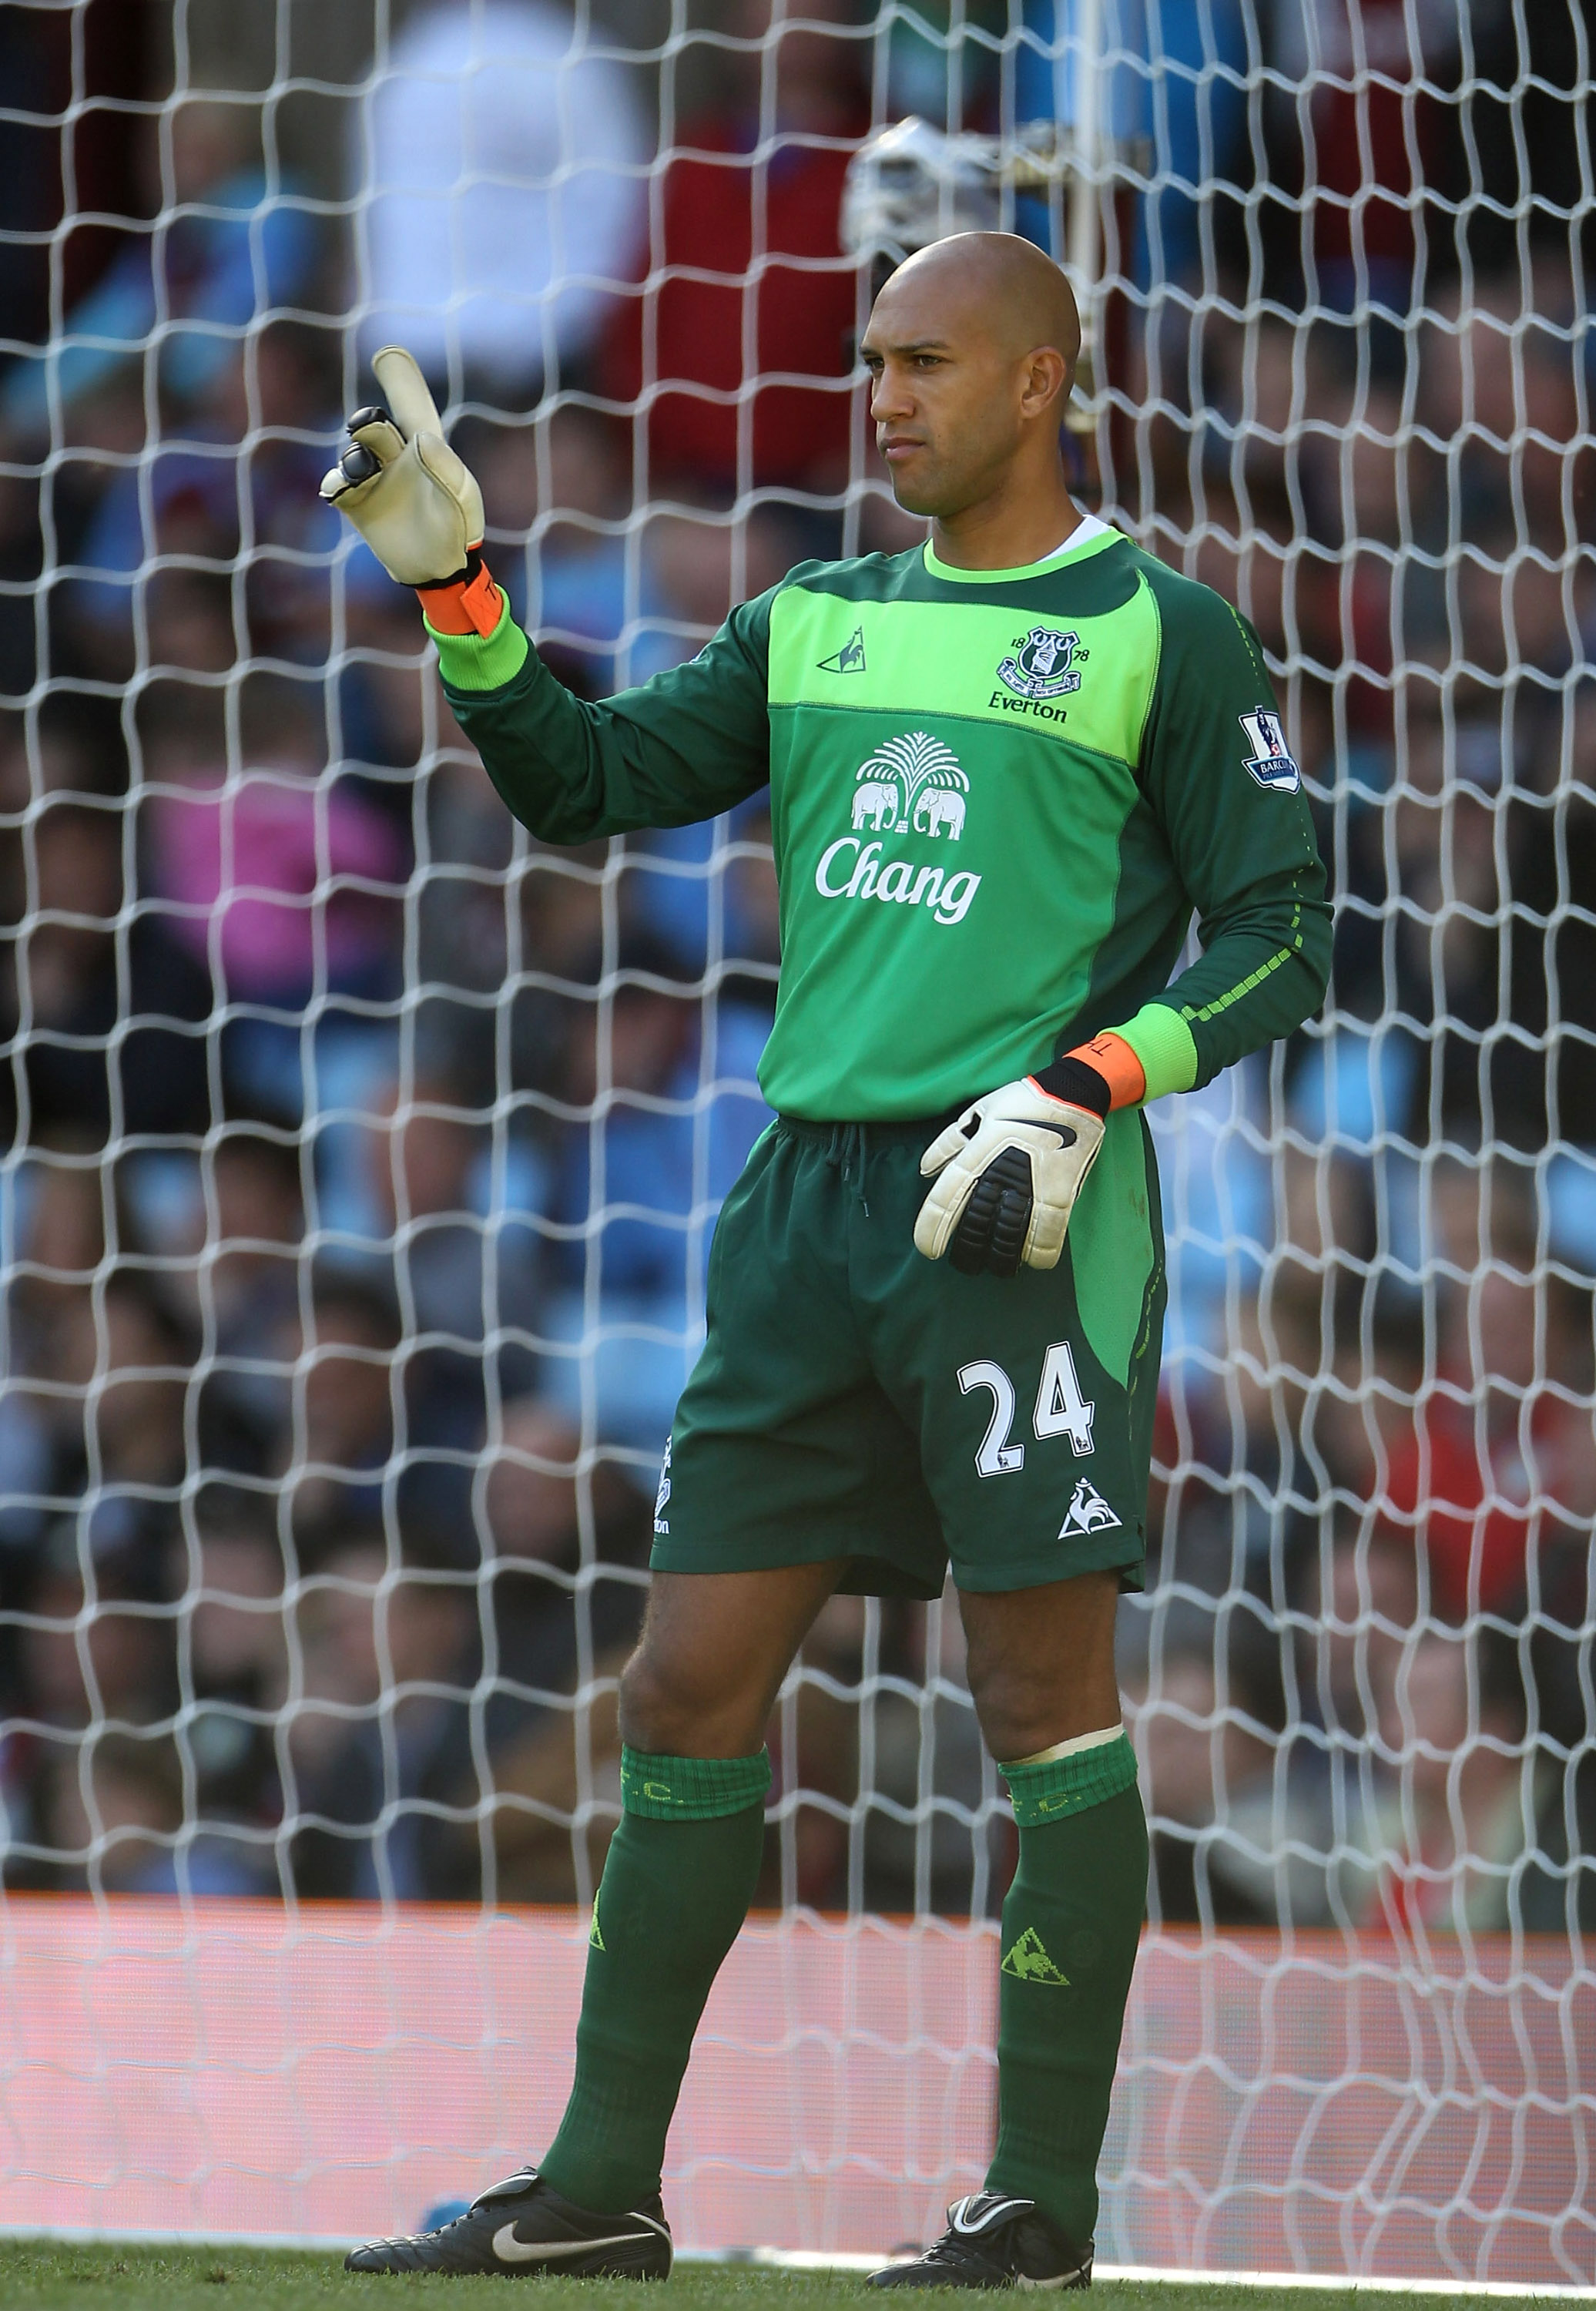 BIRMINGHAM, ENGLAND - AUGUST 29: Tim Howard of Everton signals to his team mates during the Barclays Premier League match between Aston Villa and Everton at Villa Park on August 29, 2010 in Birmingham, England.  (Photo by Phil Cole/Getty Images)